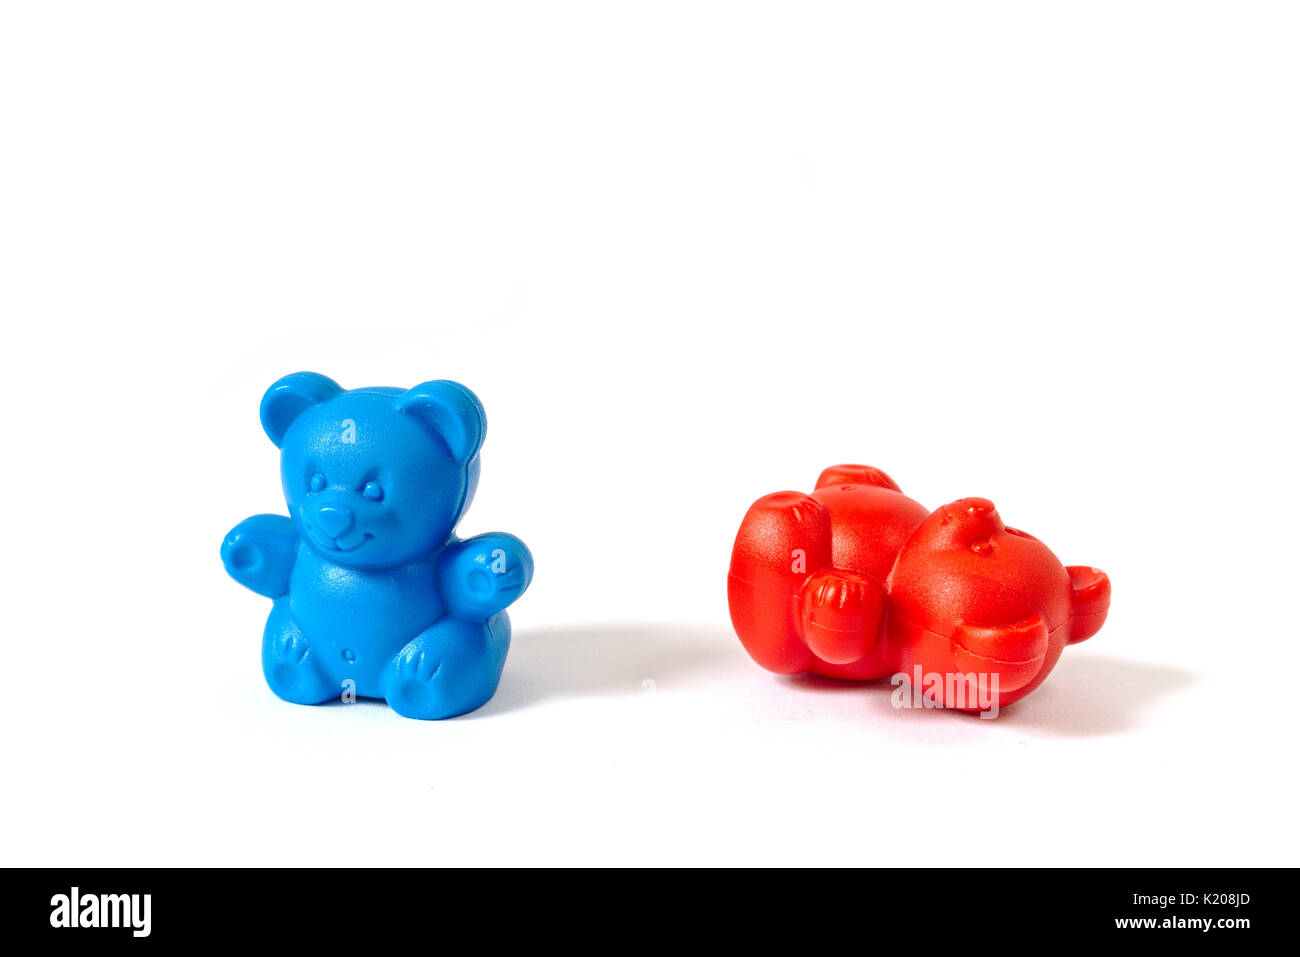 Plastic toy bears in the colors of the Democratic and Republican Party with the blue bear standing and the red bear knocked over Stock Photo